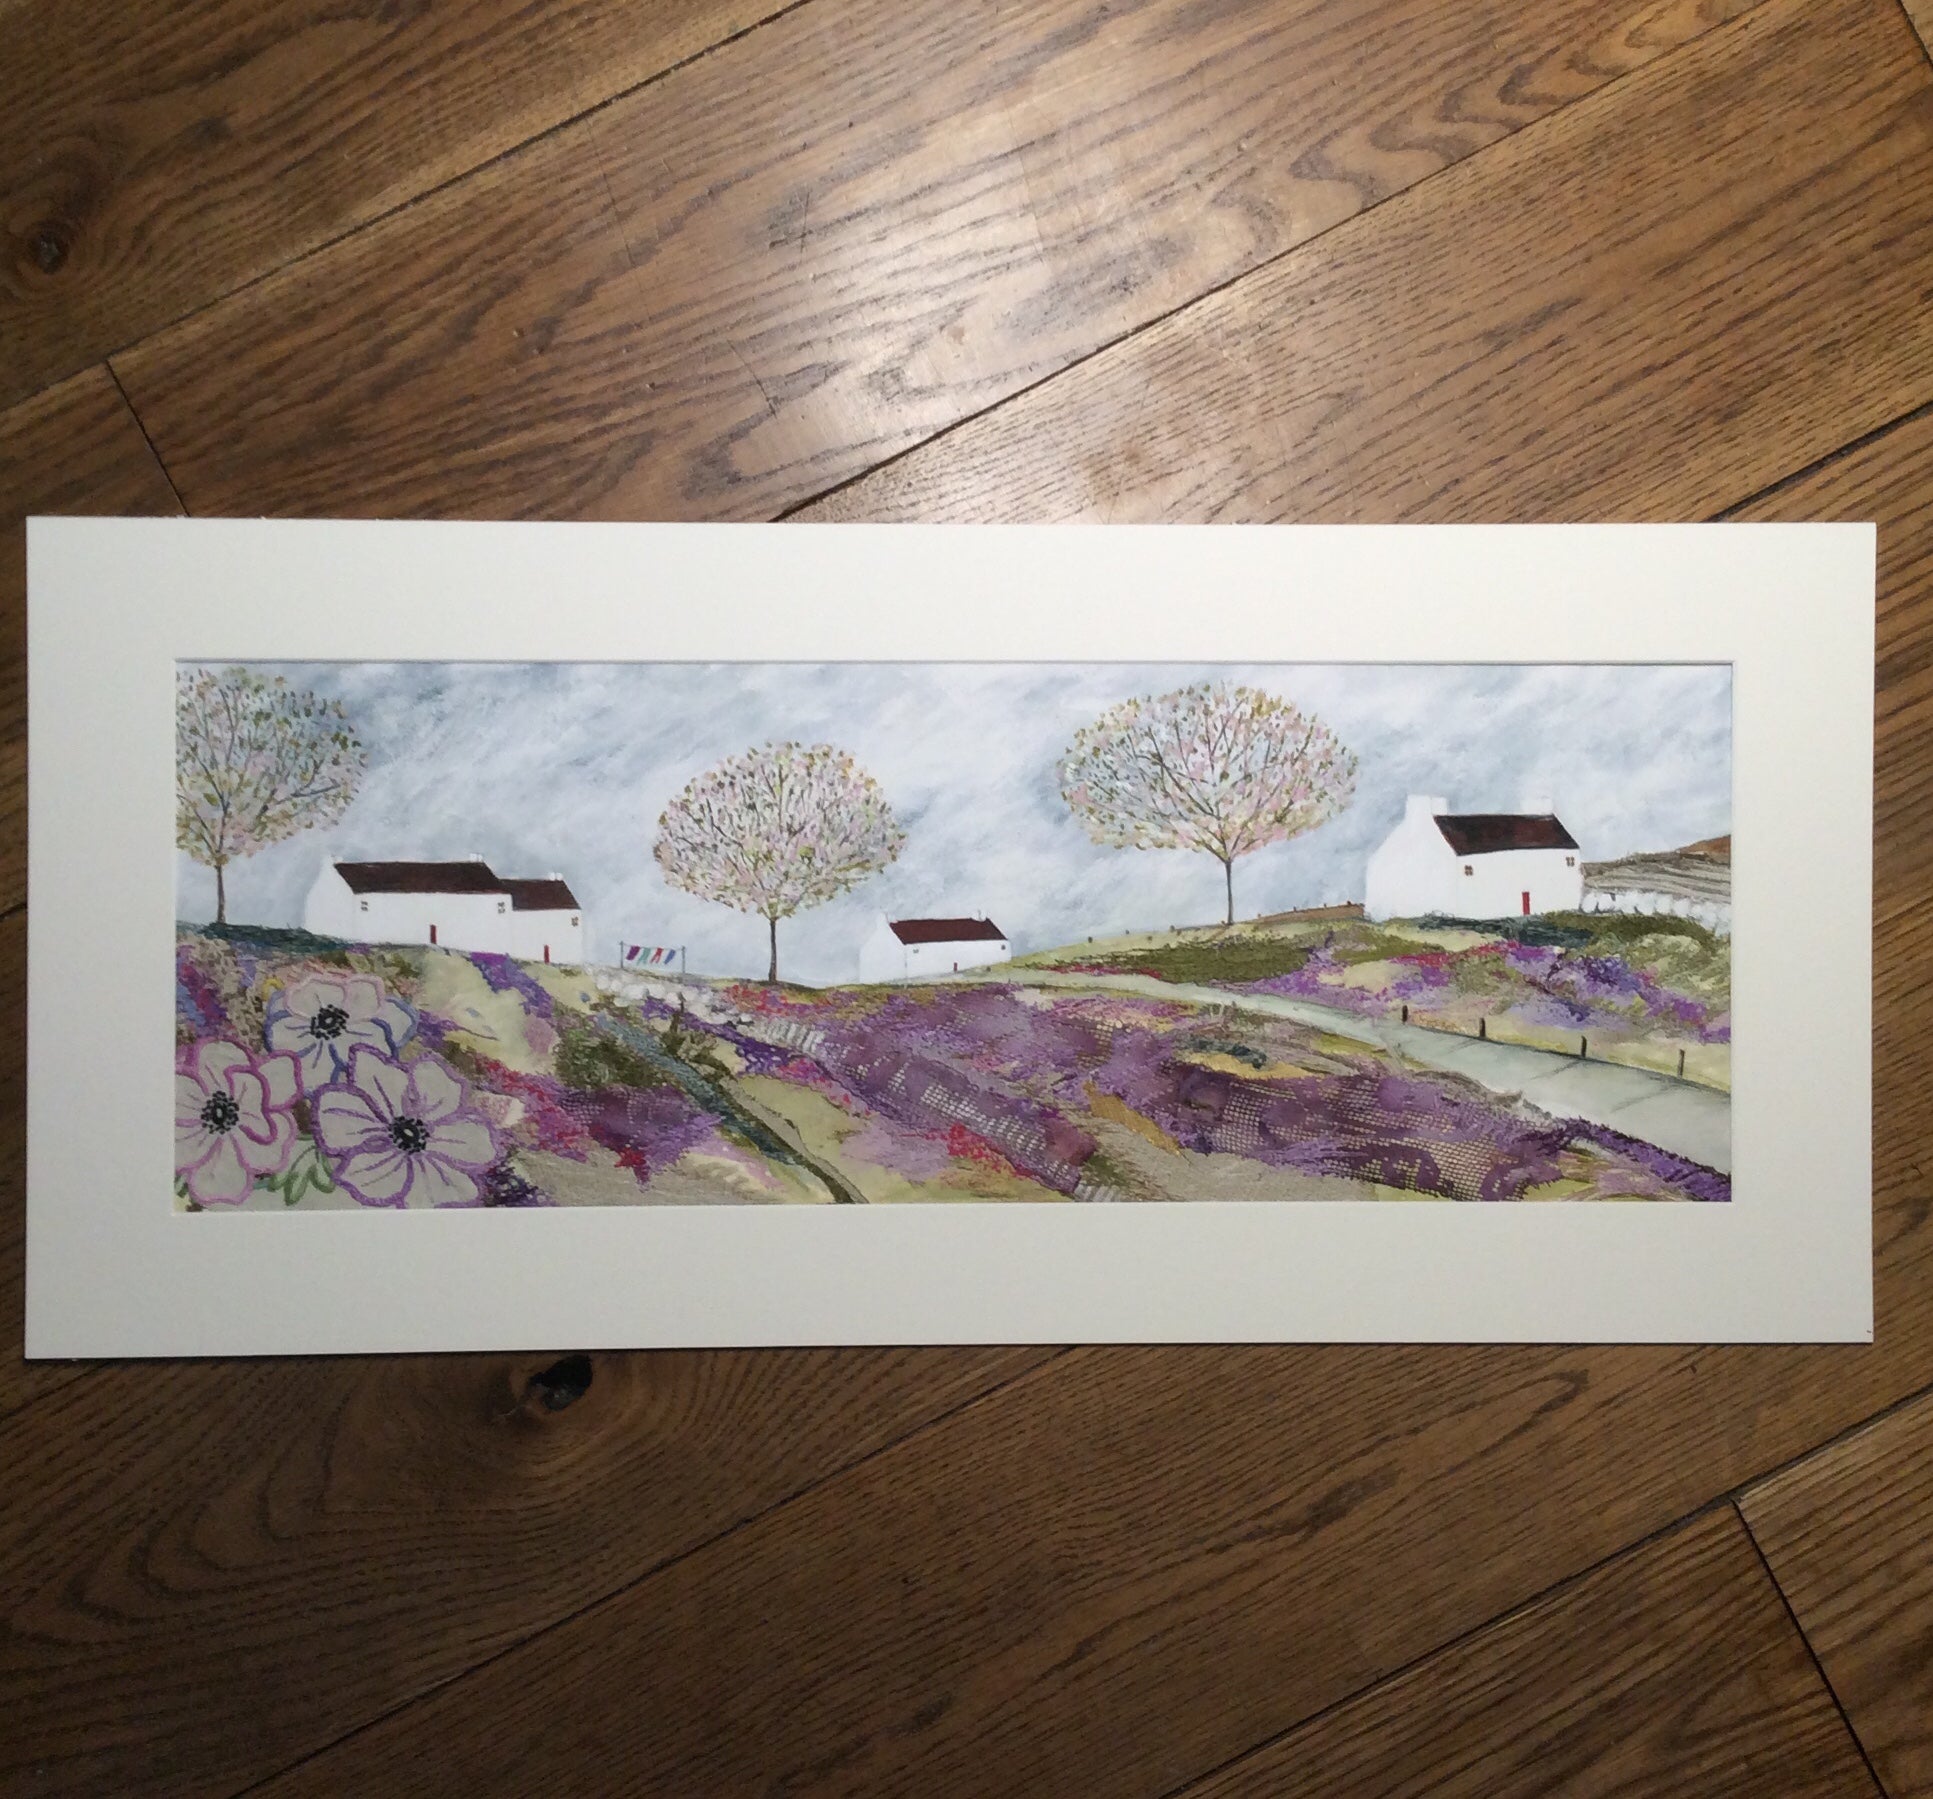 Special edition limited edition print by Louise O'Hara “Down to the village” Special Edition